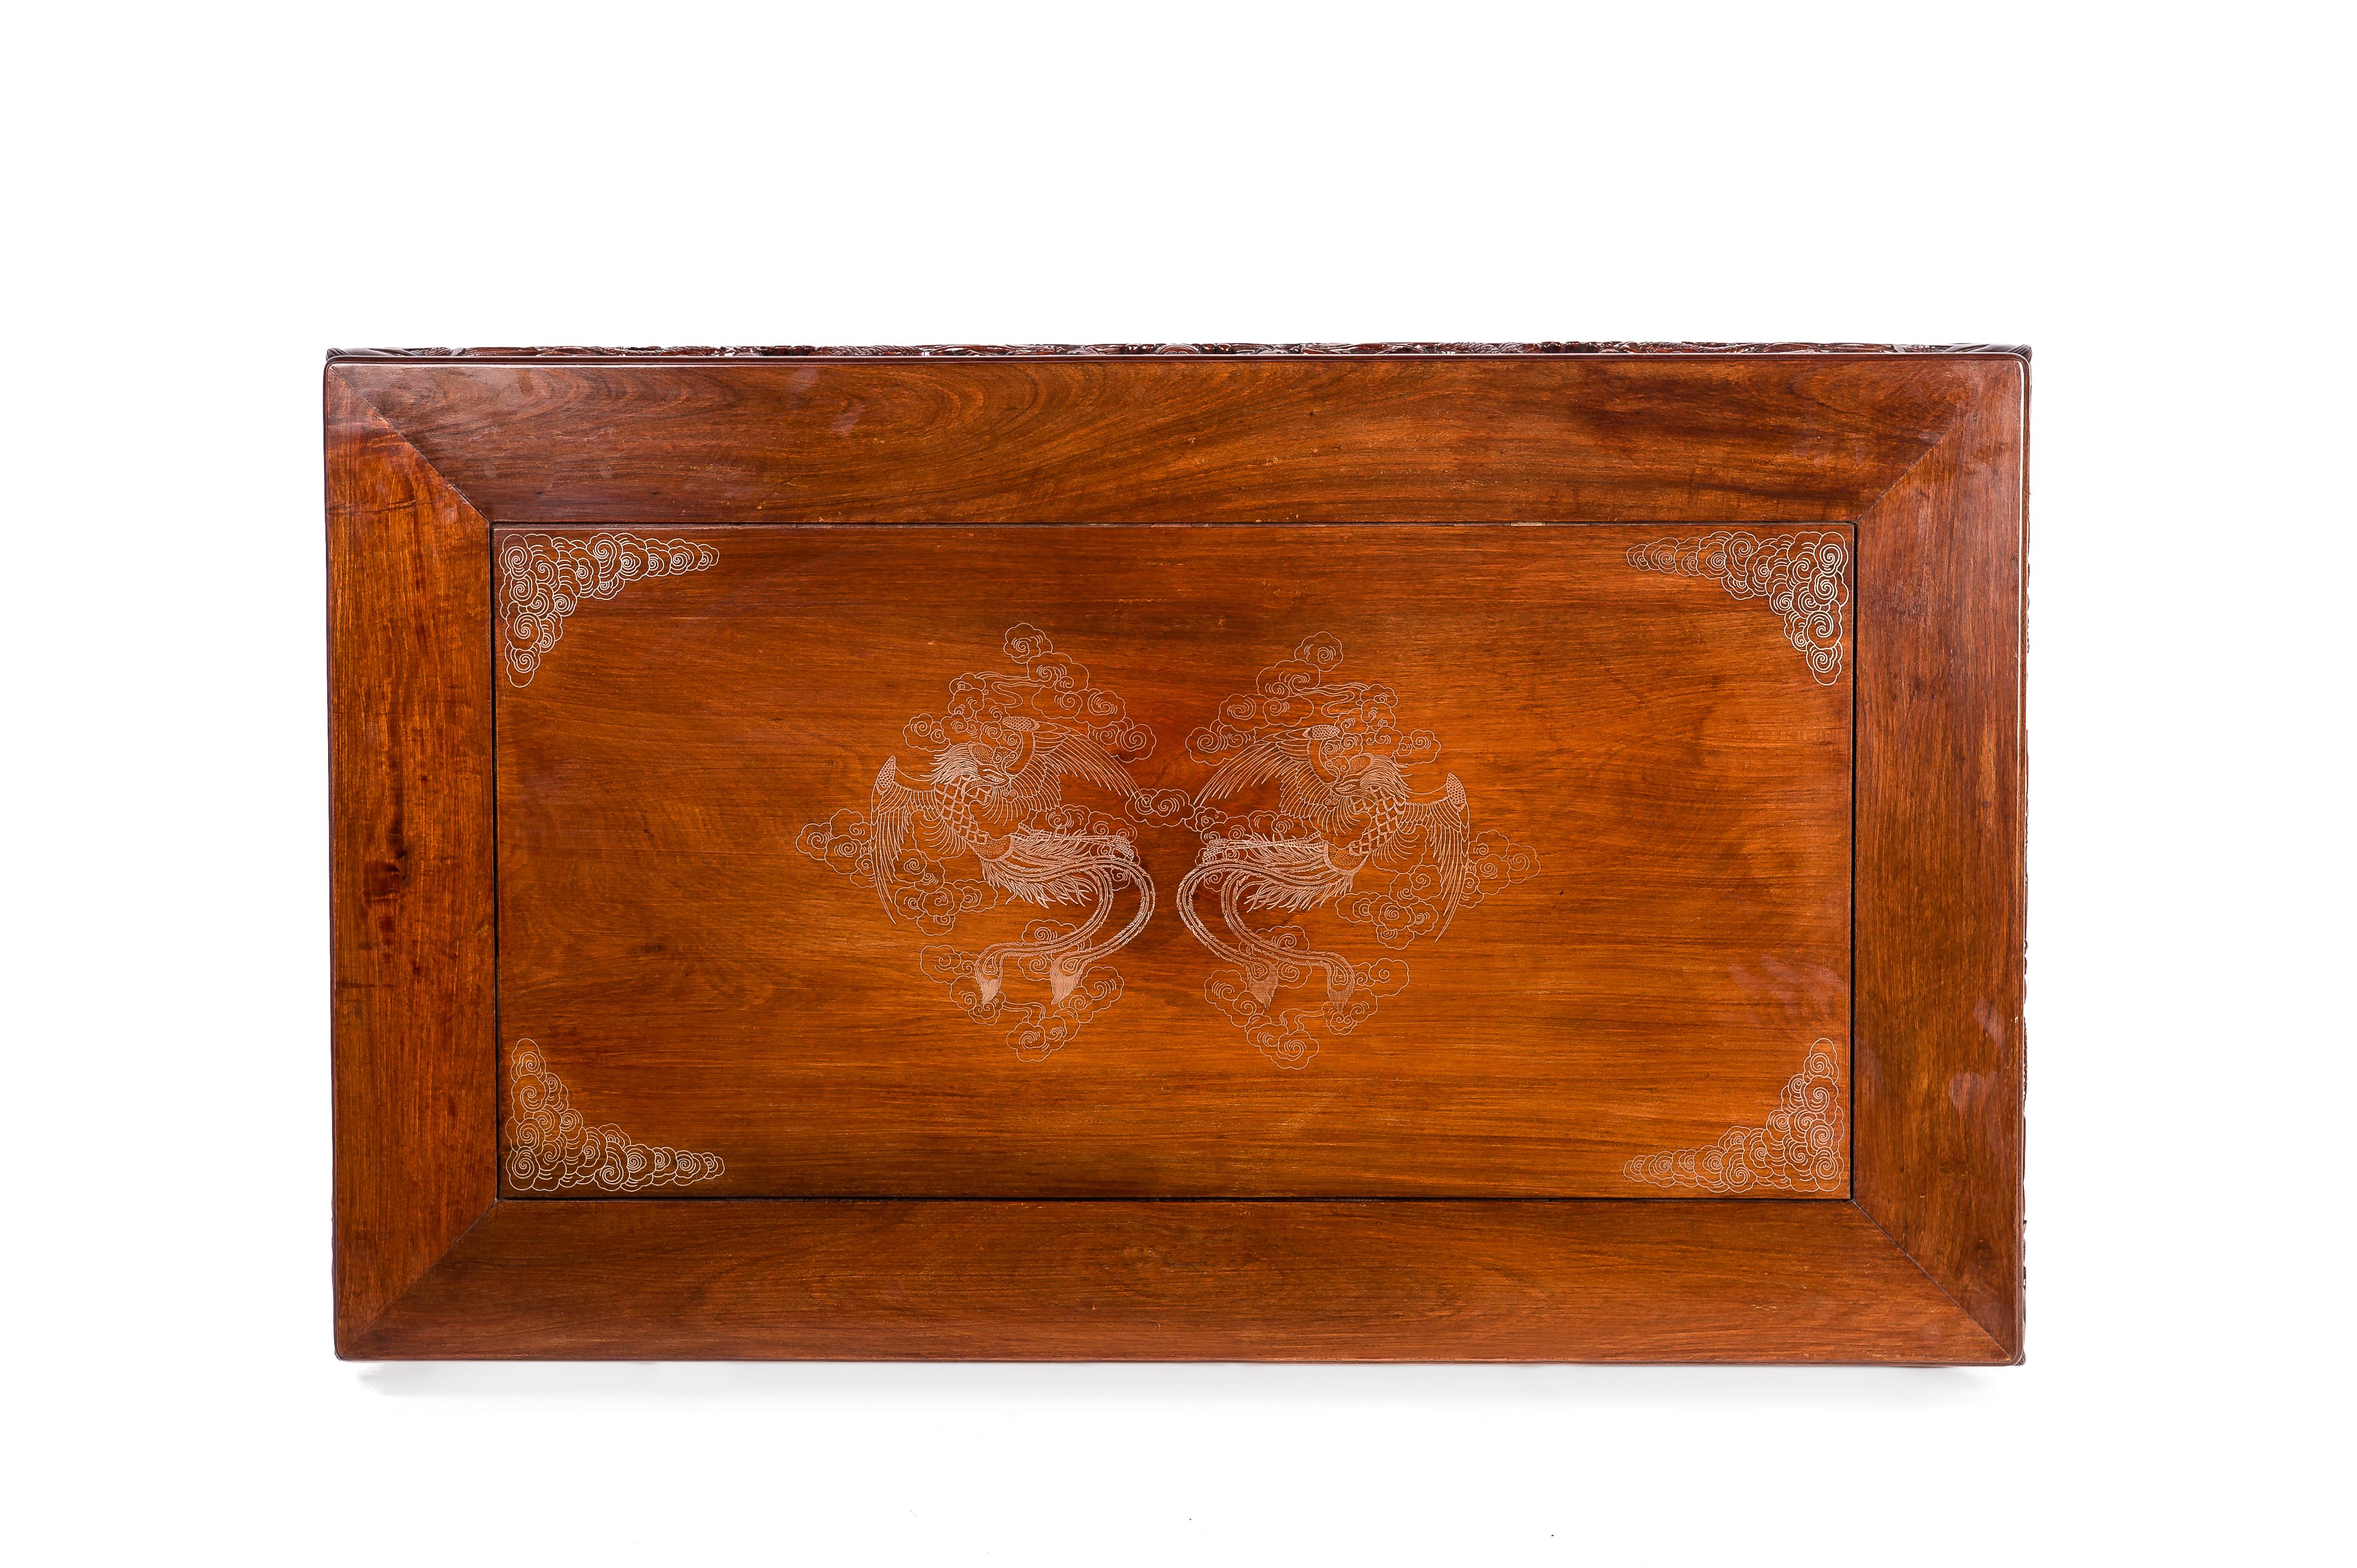 An elegant rectangular coffee table or opium table made in solid mahogany with beautiful grain.
The table has a rectangular paneled top with delicate inlaid silver wire figures. In the center, it shows two phoenixes in the clouds flanked by clouds